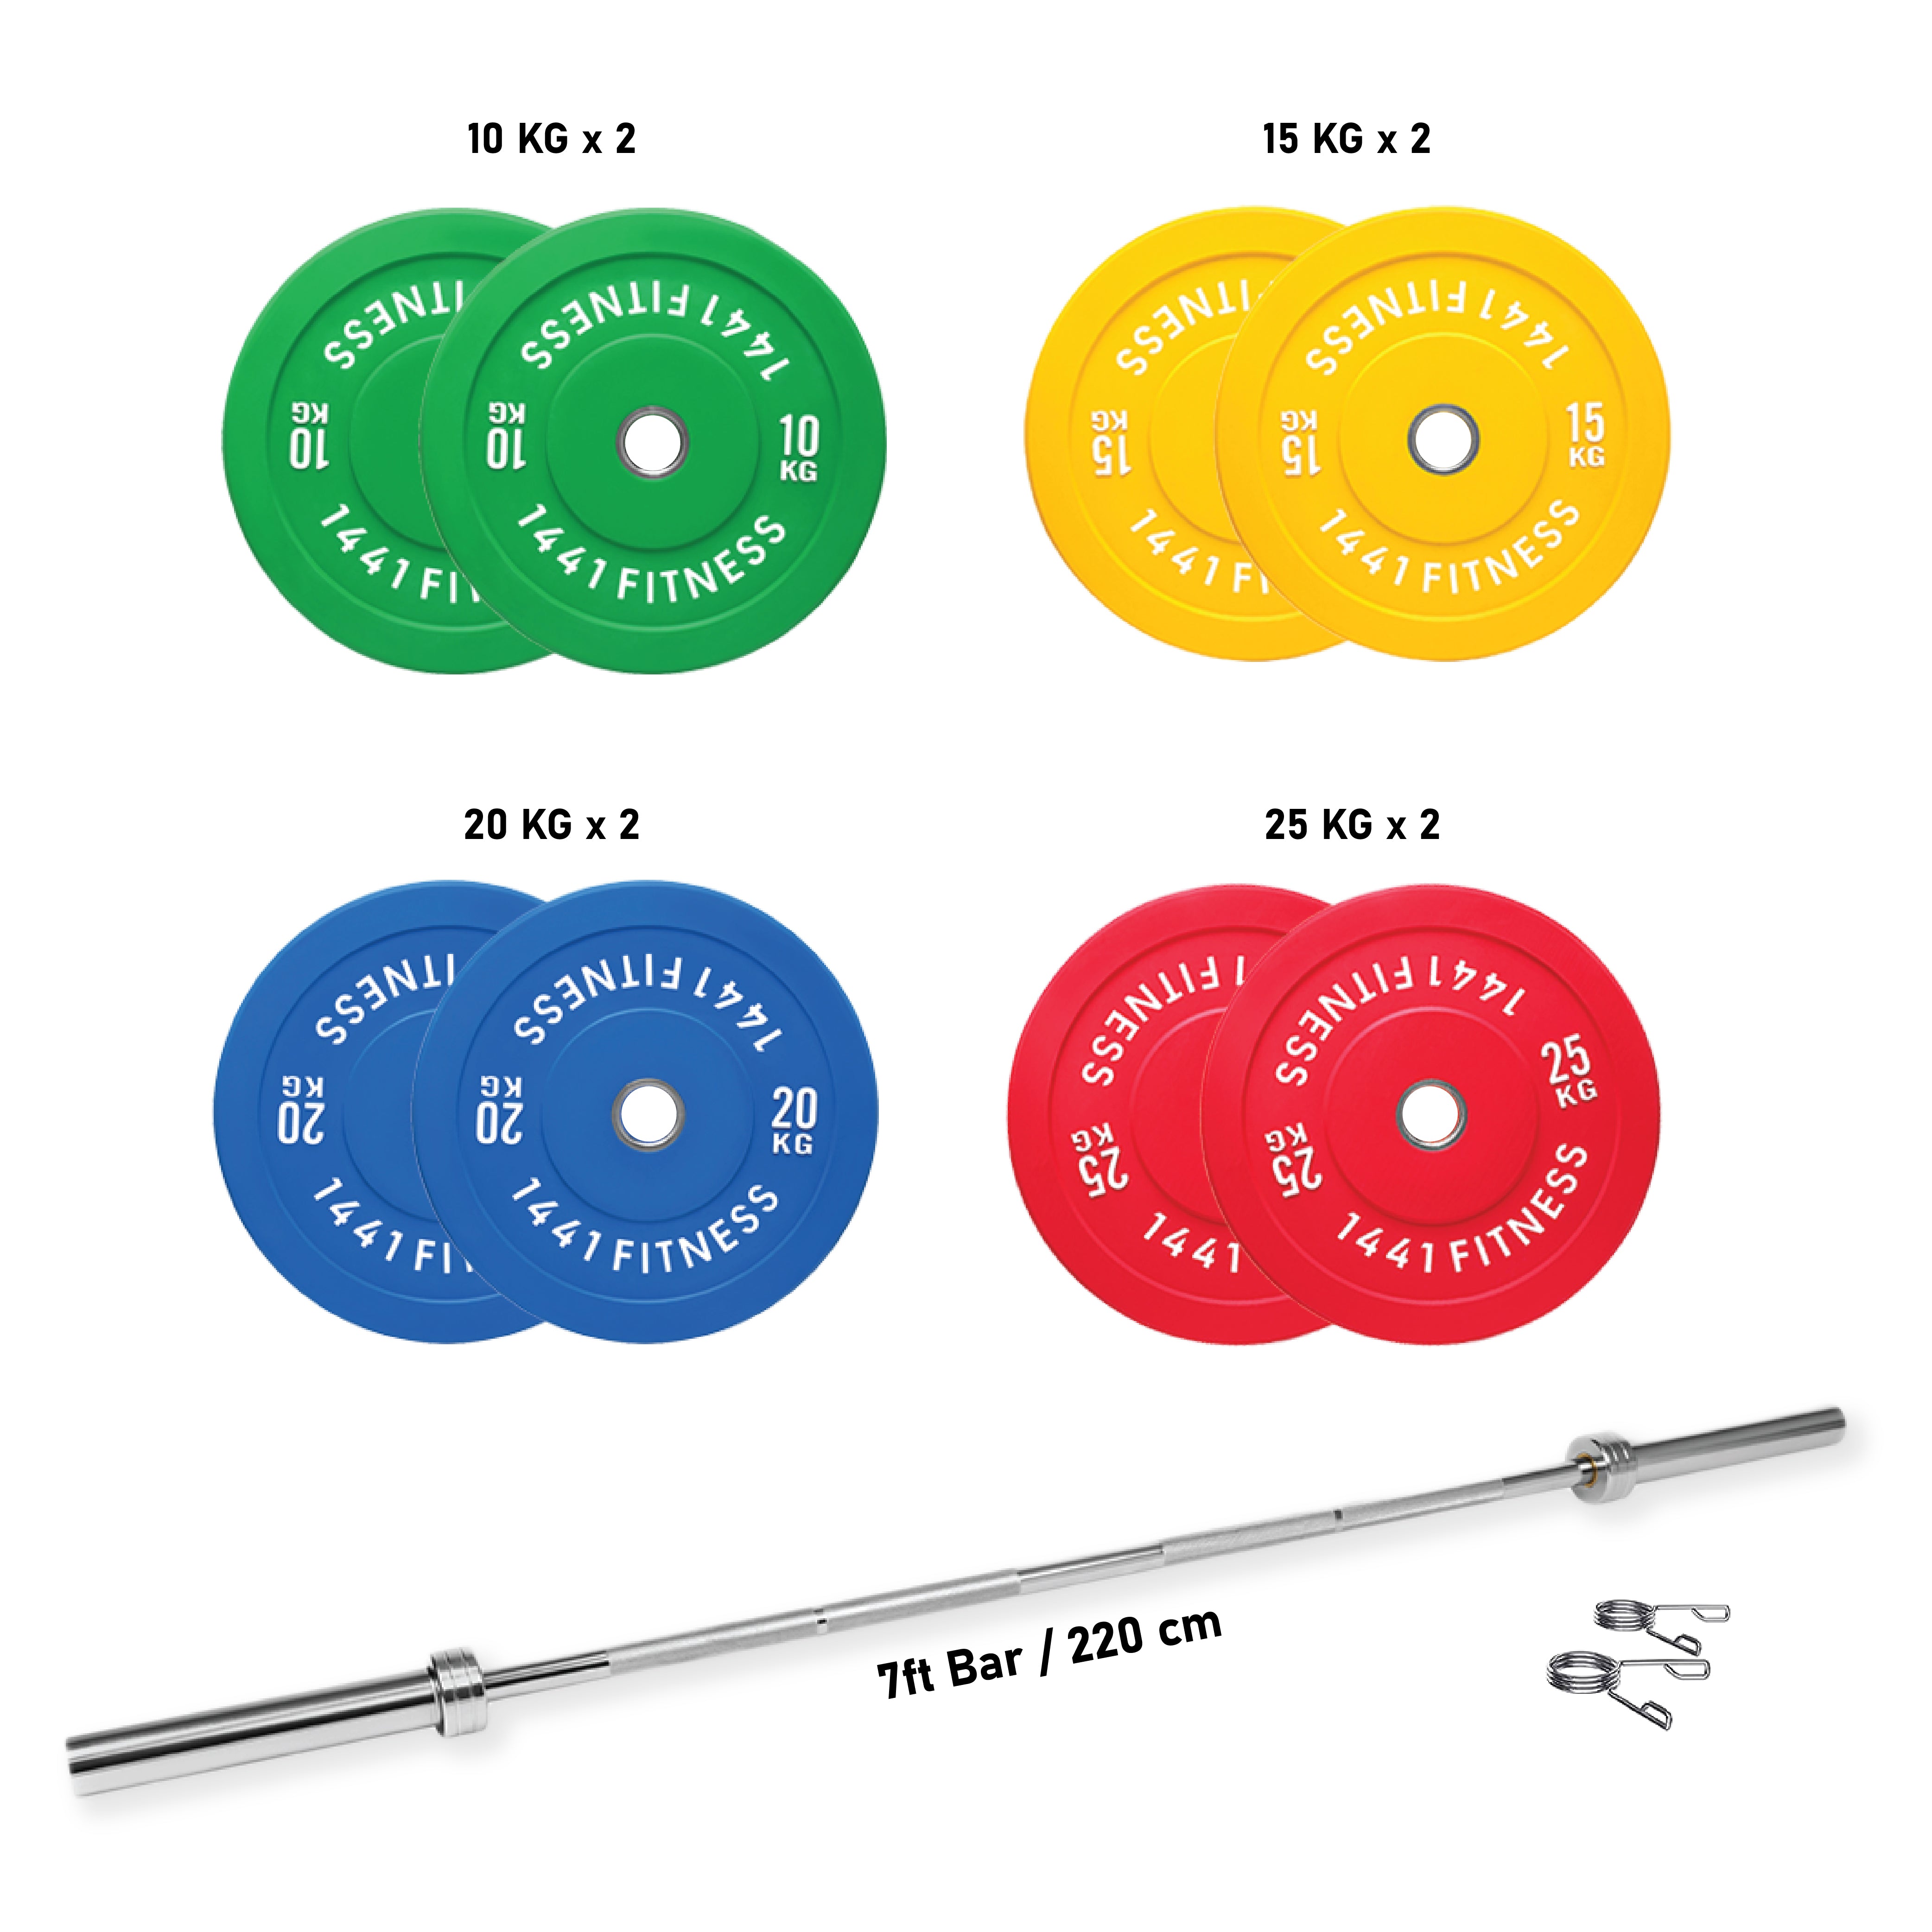 7 Ft Olympic Barbell and Color Bumper Plate Set - 160 KG | 1441 Fitness